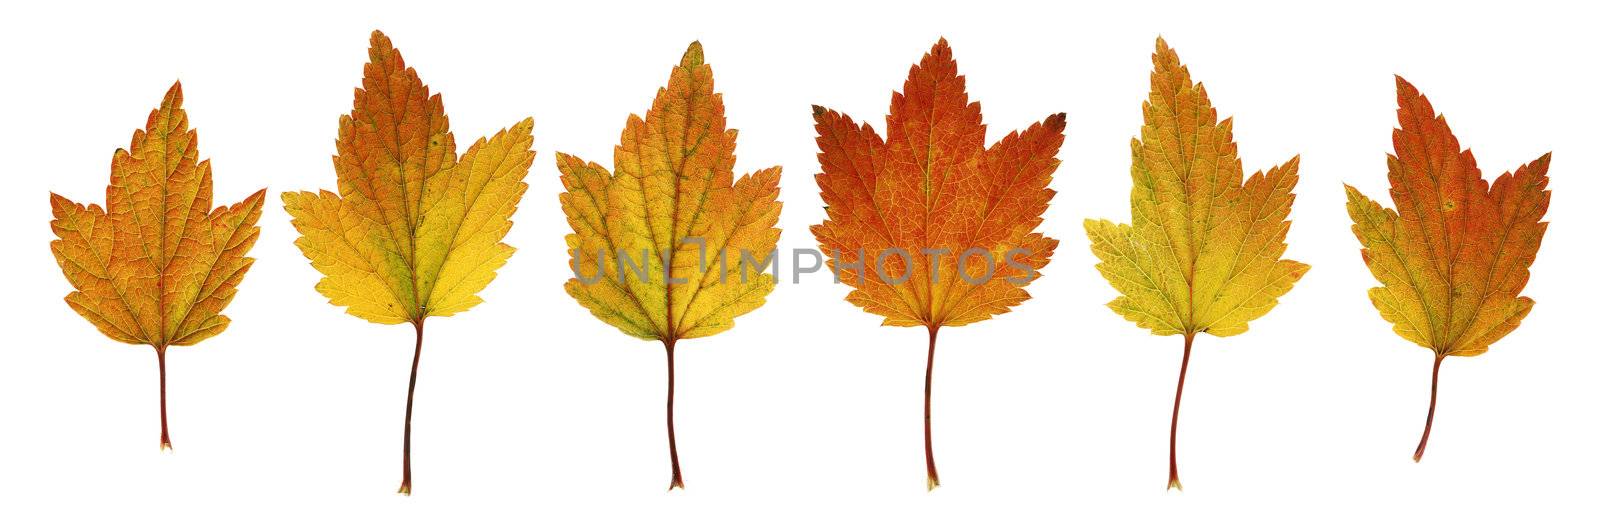 Autumn leaves from currant bush isolated on white